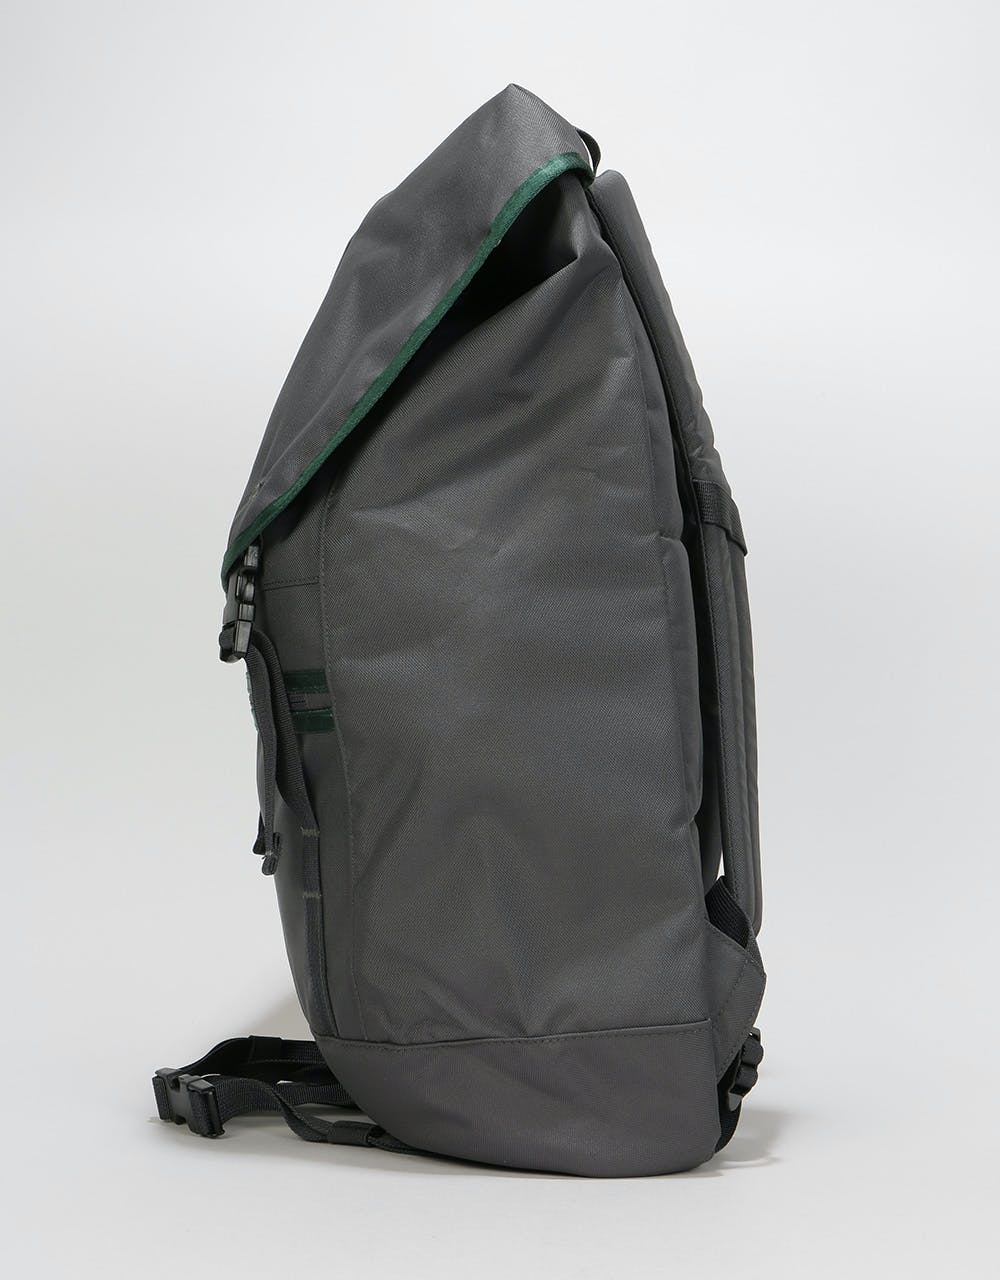 Patagonia Arbor Classic Pack 25L Backpack - Forge Grey